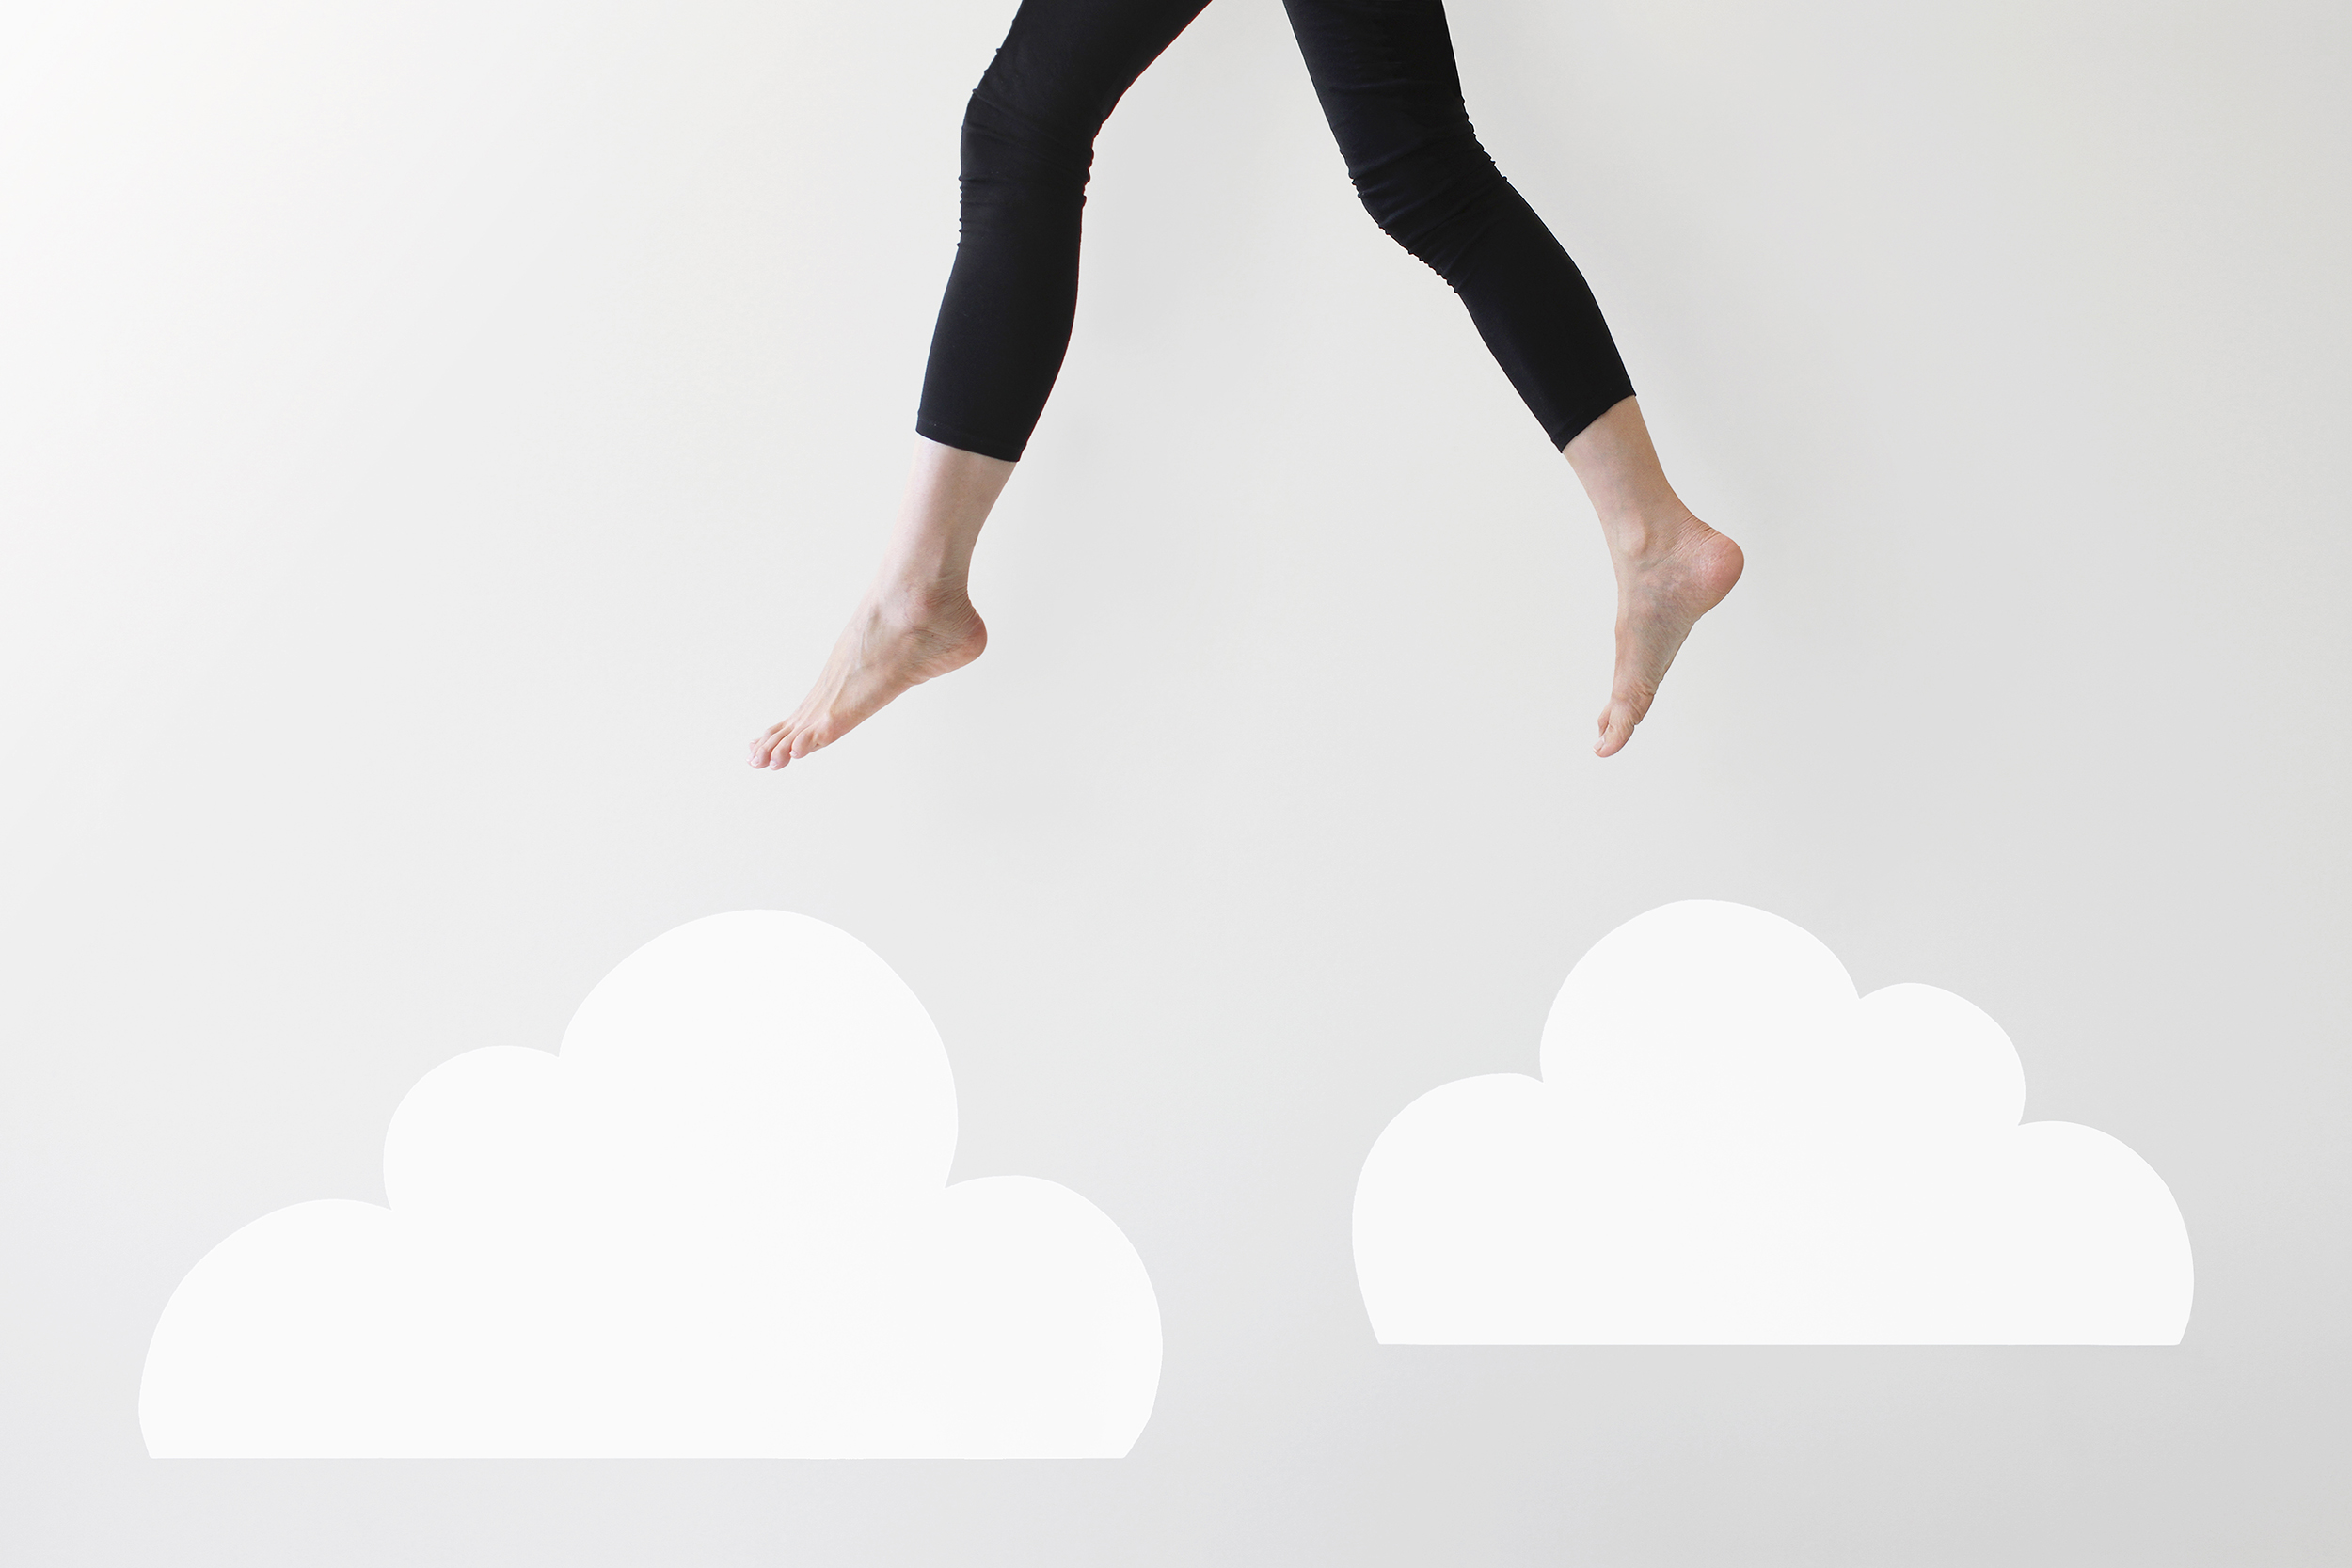 clouds-jumping-Happiness-success-achievment-mental-health-motto-stock